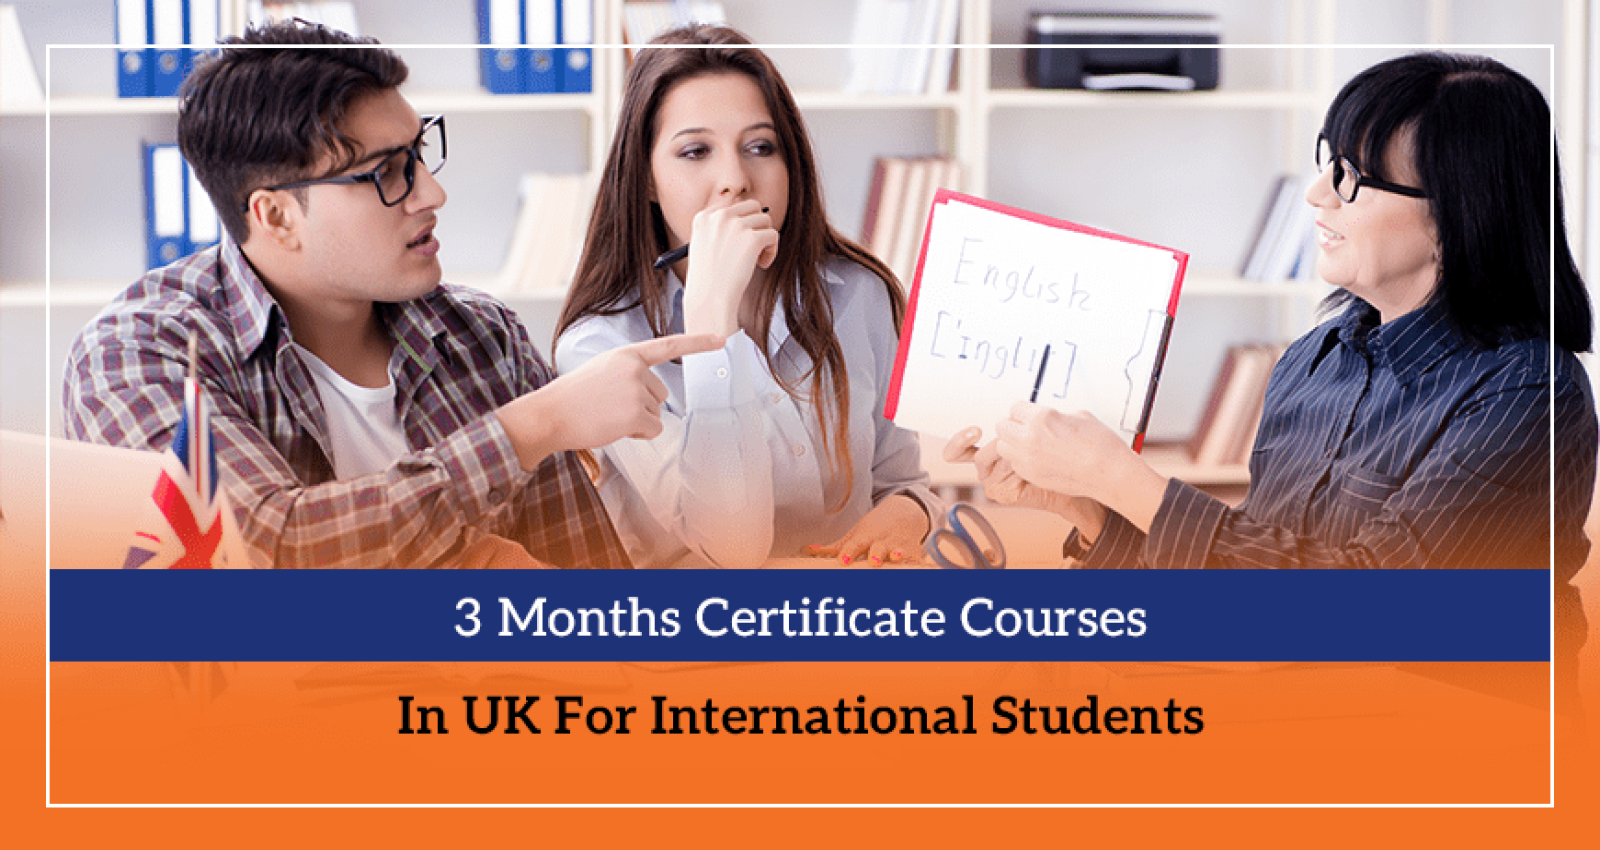 3 Months Certificate Courses In UK For International Students